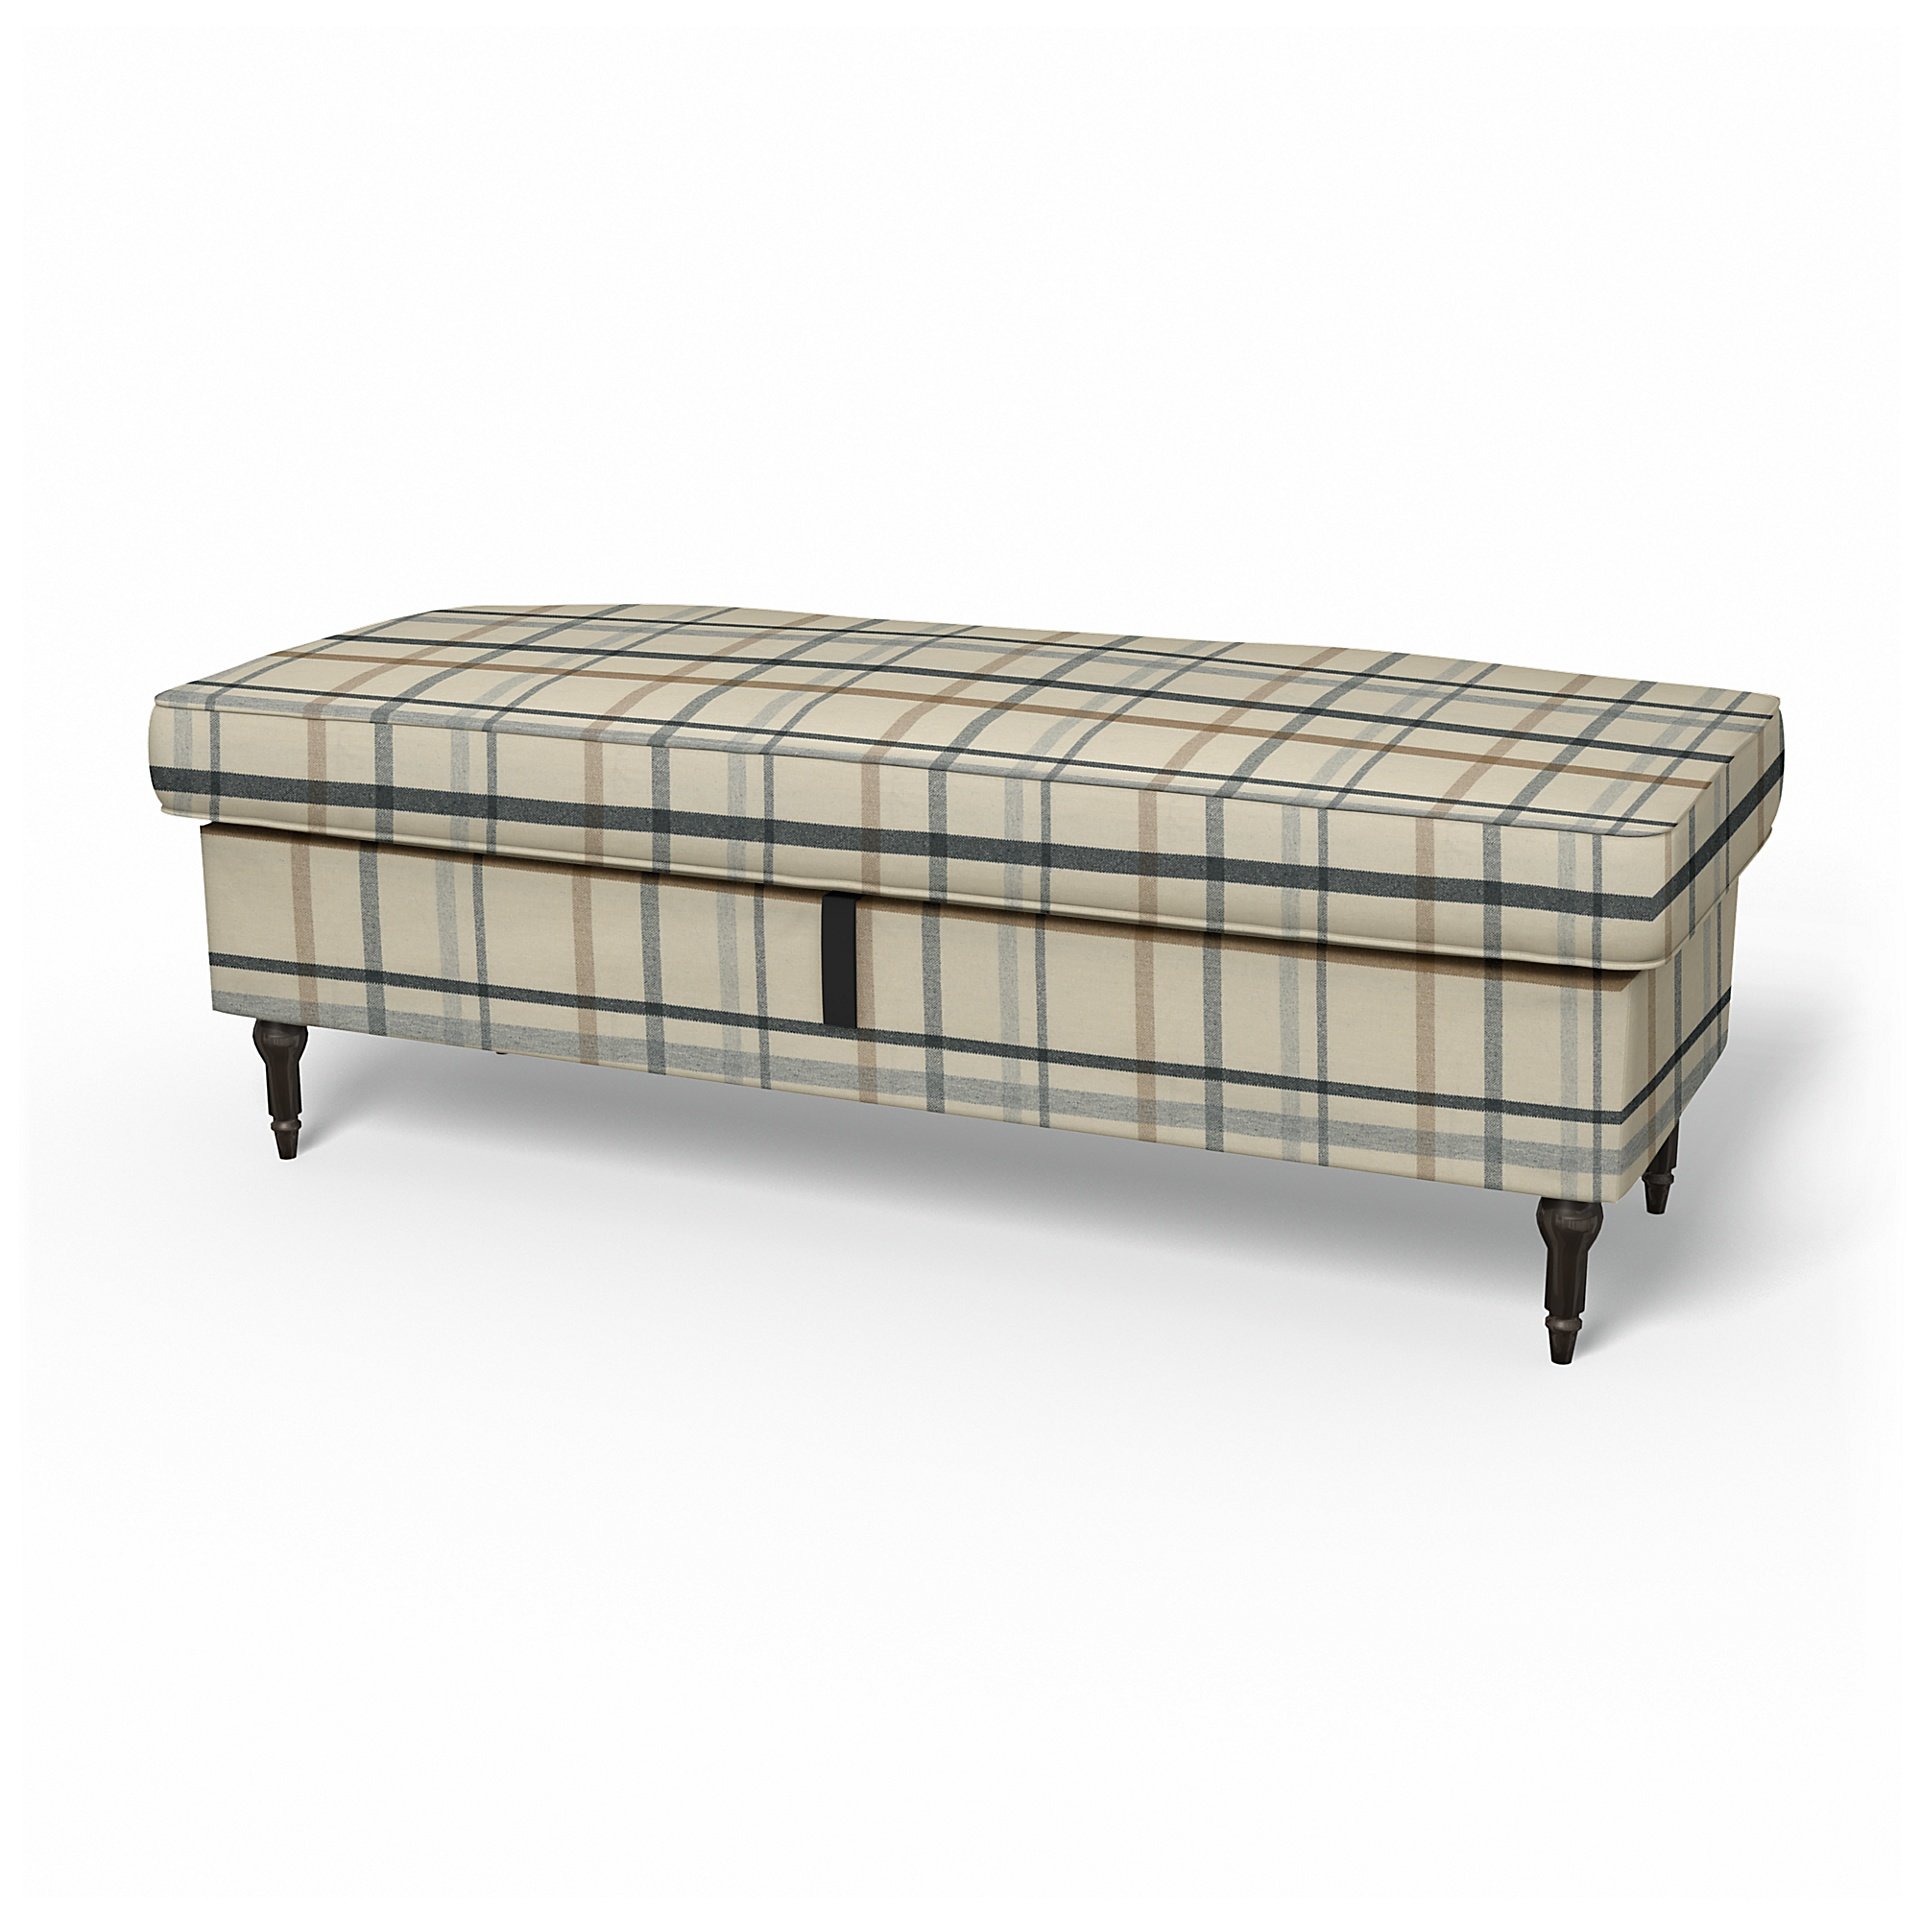 IKEA - Stocksund Bench Cover, Fawn Brown, Wool - Bemz